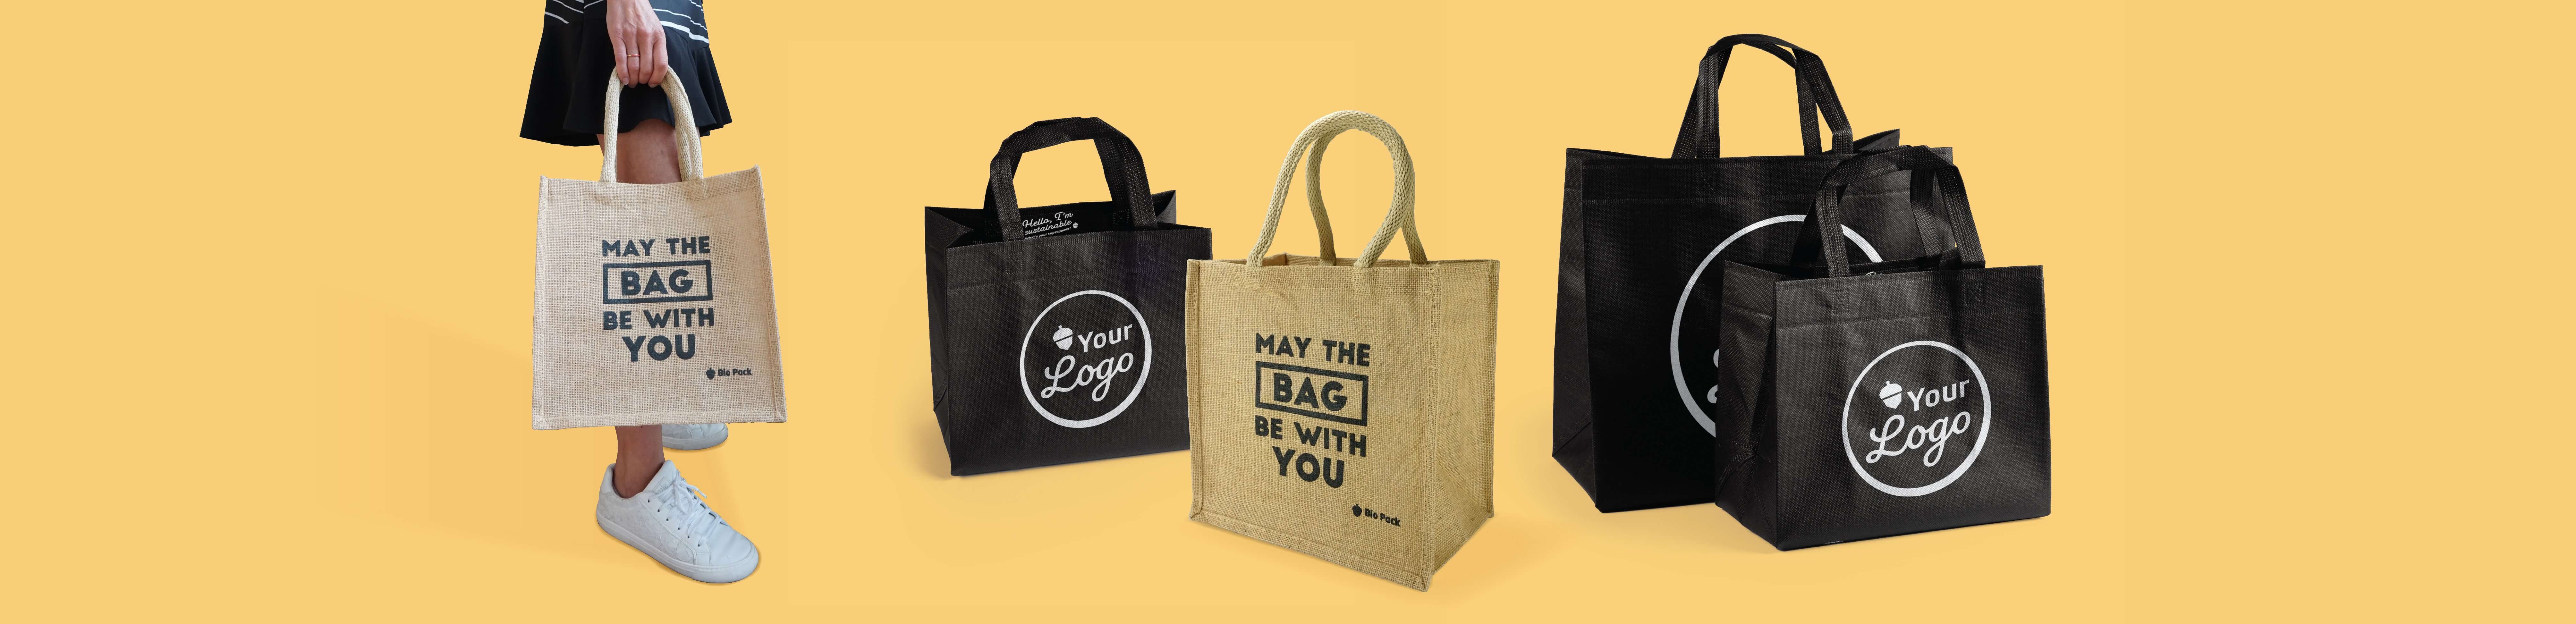 Reusable bags and carrier bags